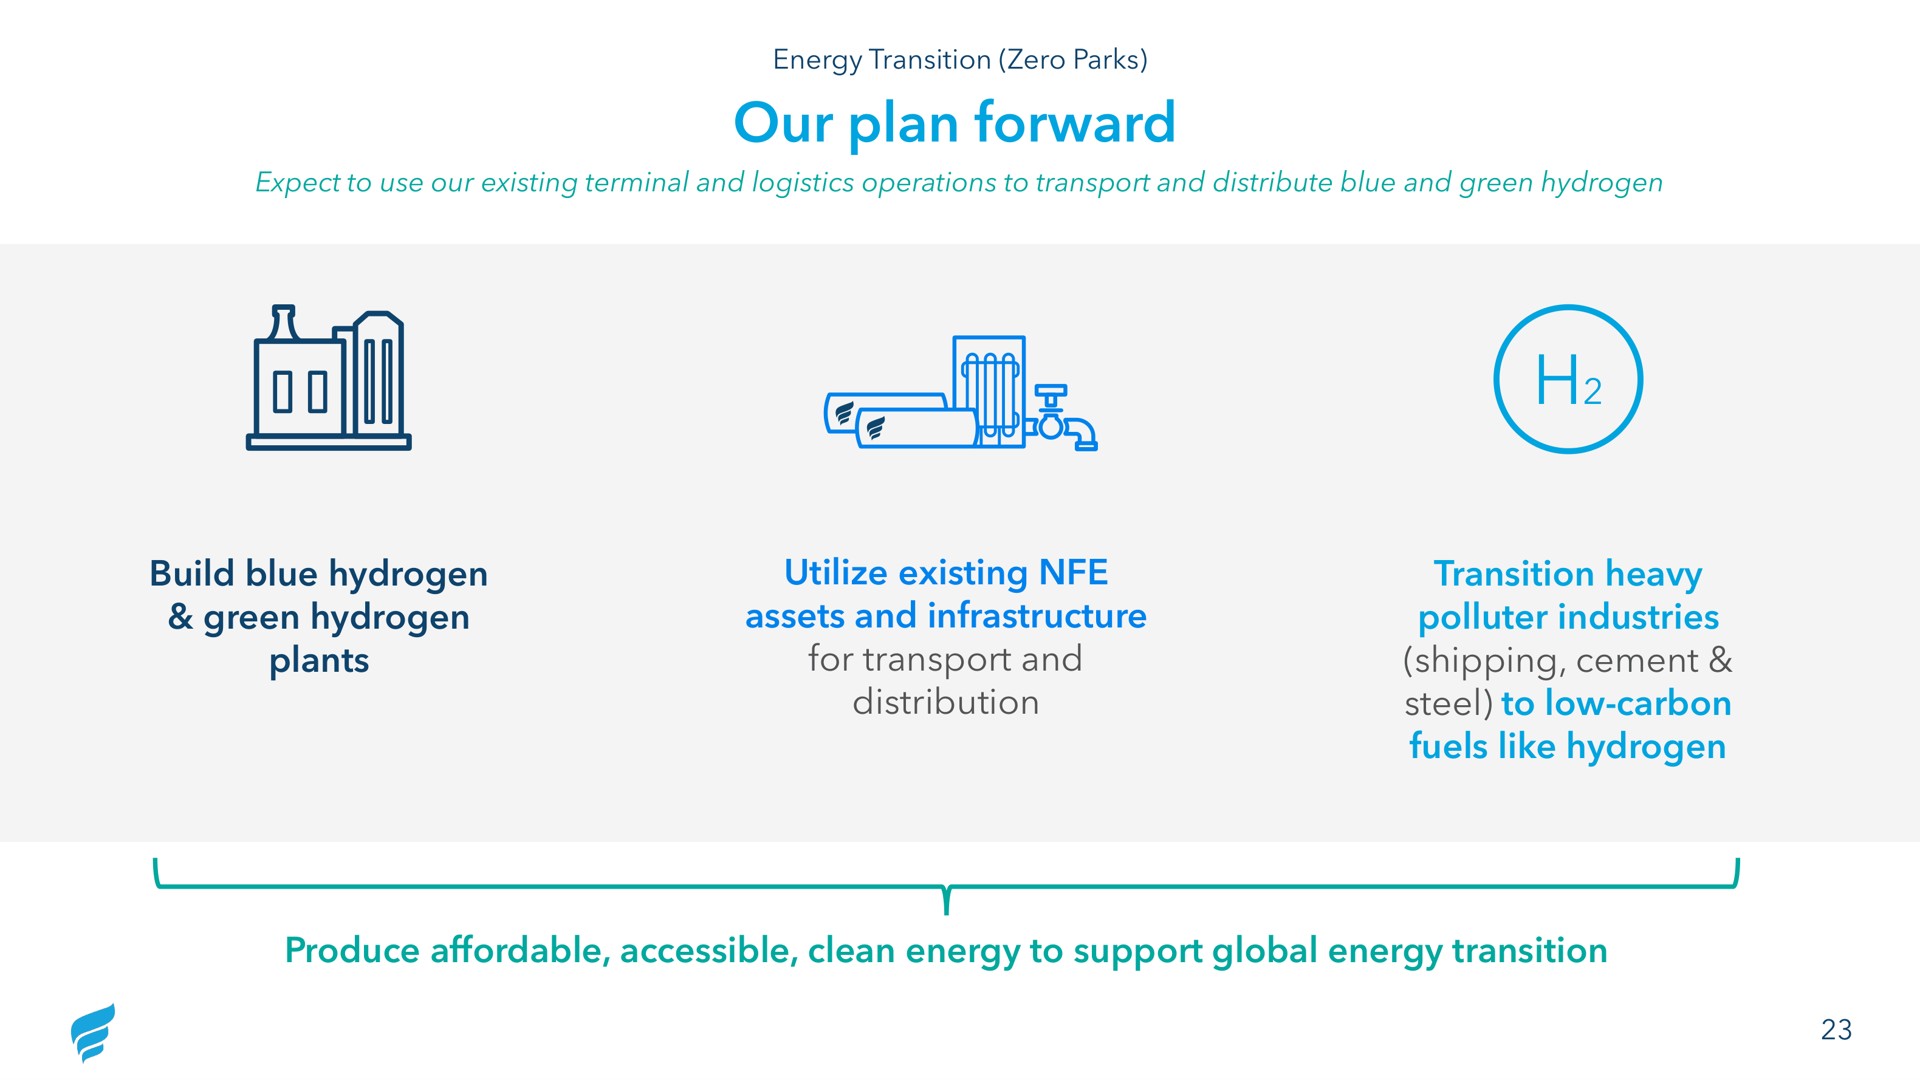 our plan forward build blue hydrogen green hydrogen plants utilize existing assets and infrastructure for transport and transition heavy polluter industries shipping cement fuels like hydrogen | NewFortress Energy